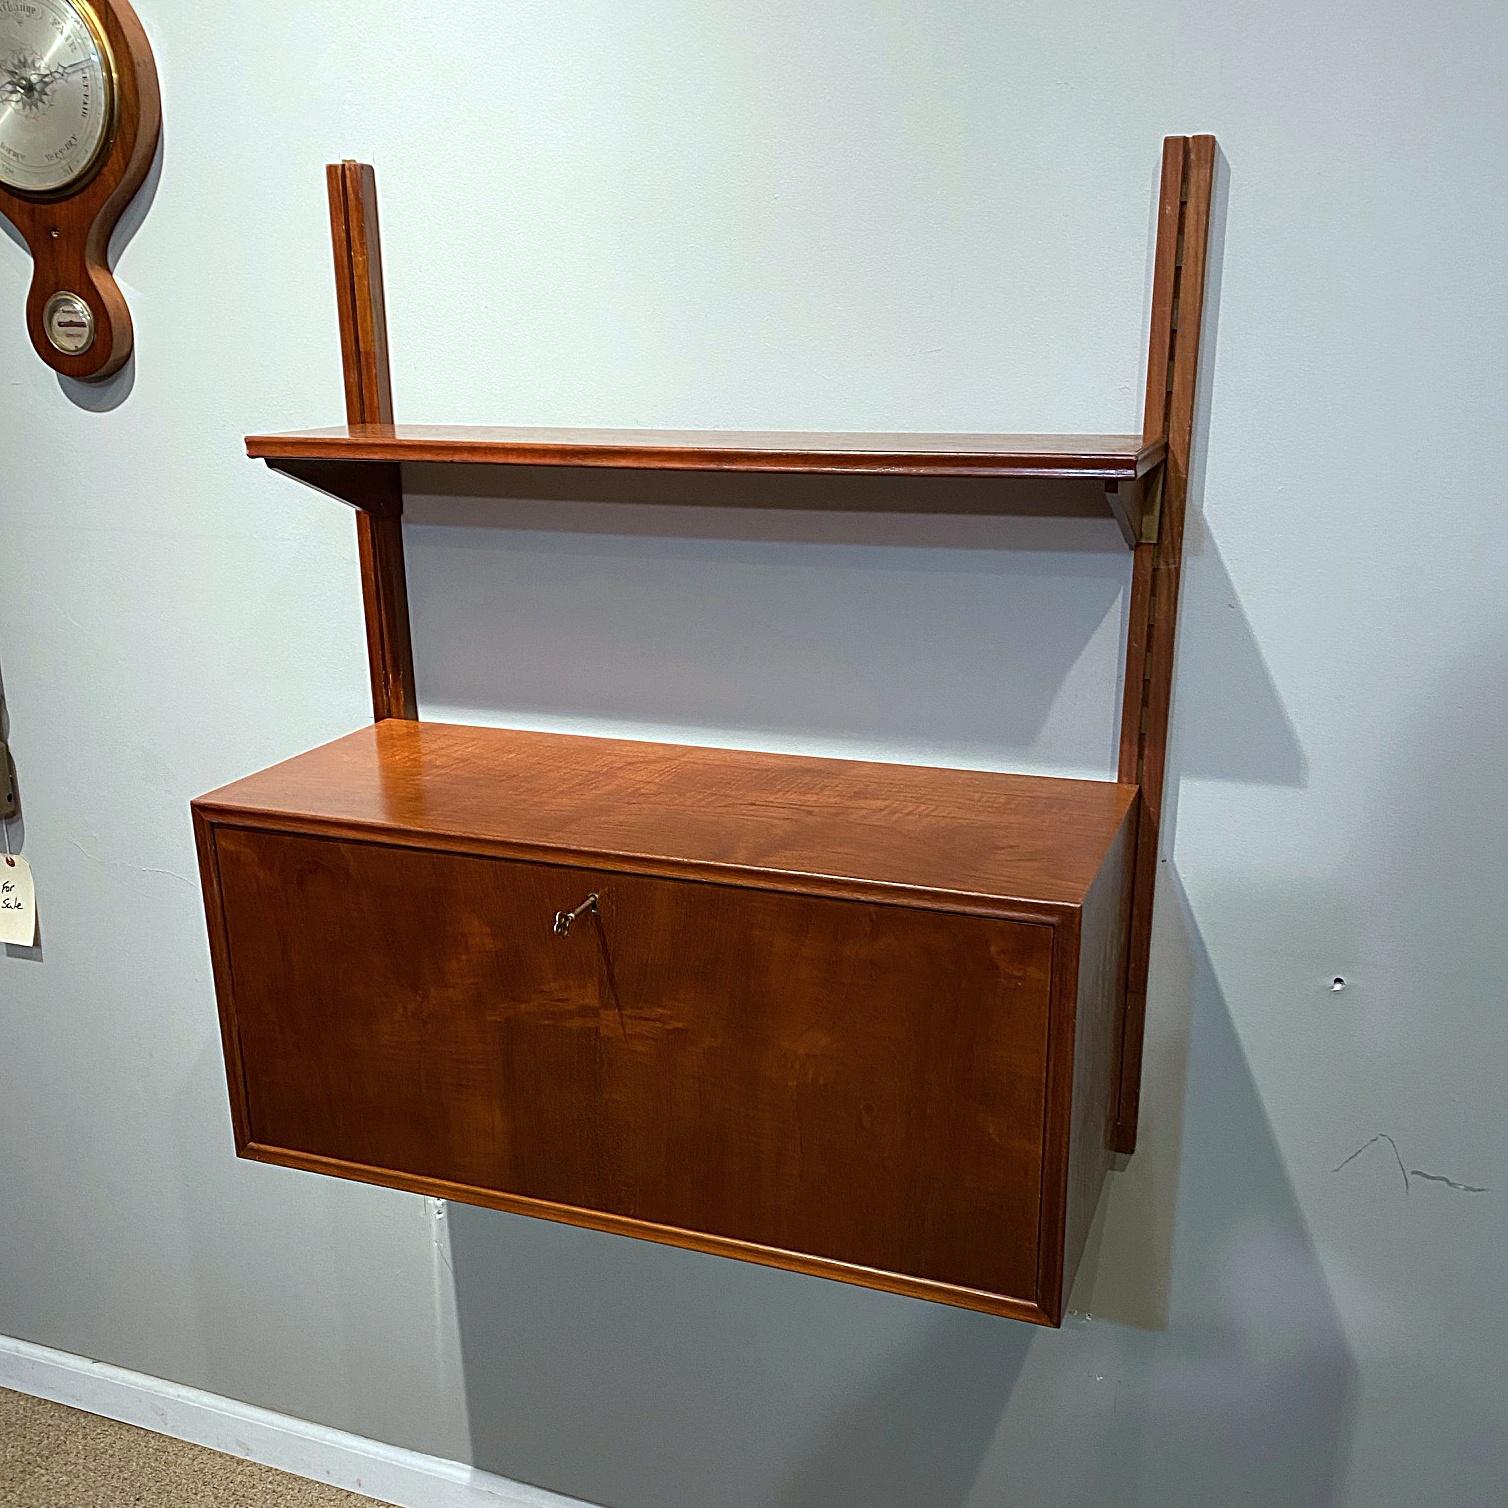 Polished Danish Modern Child's Hanging Fall Front Desk with Shelf